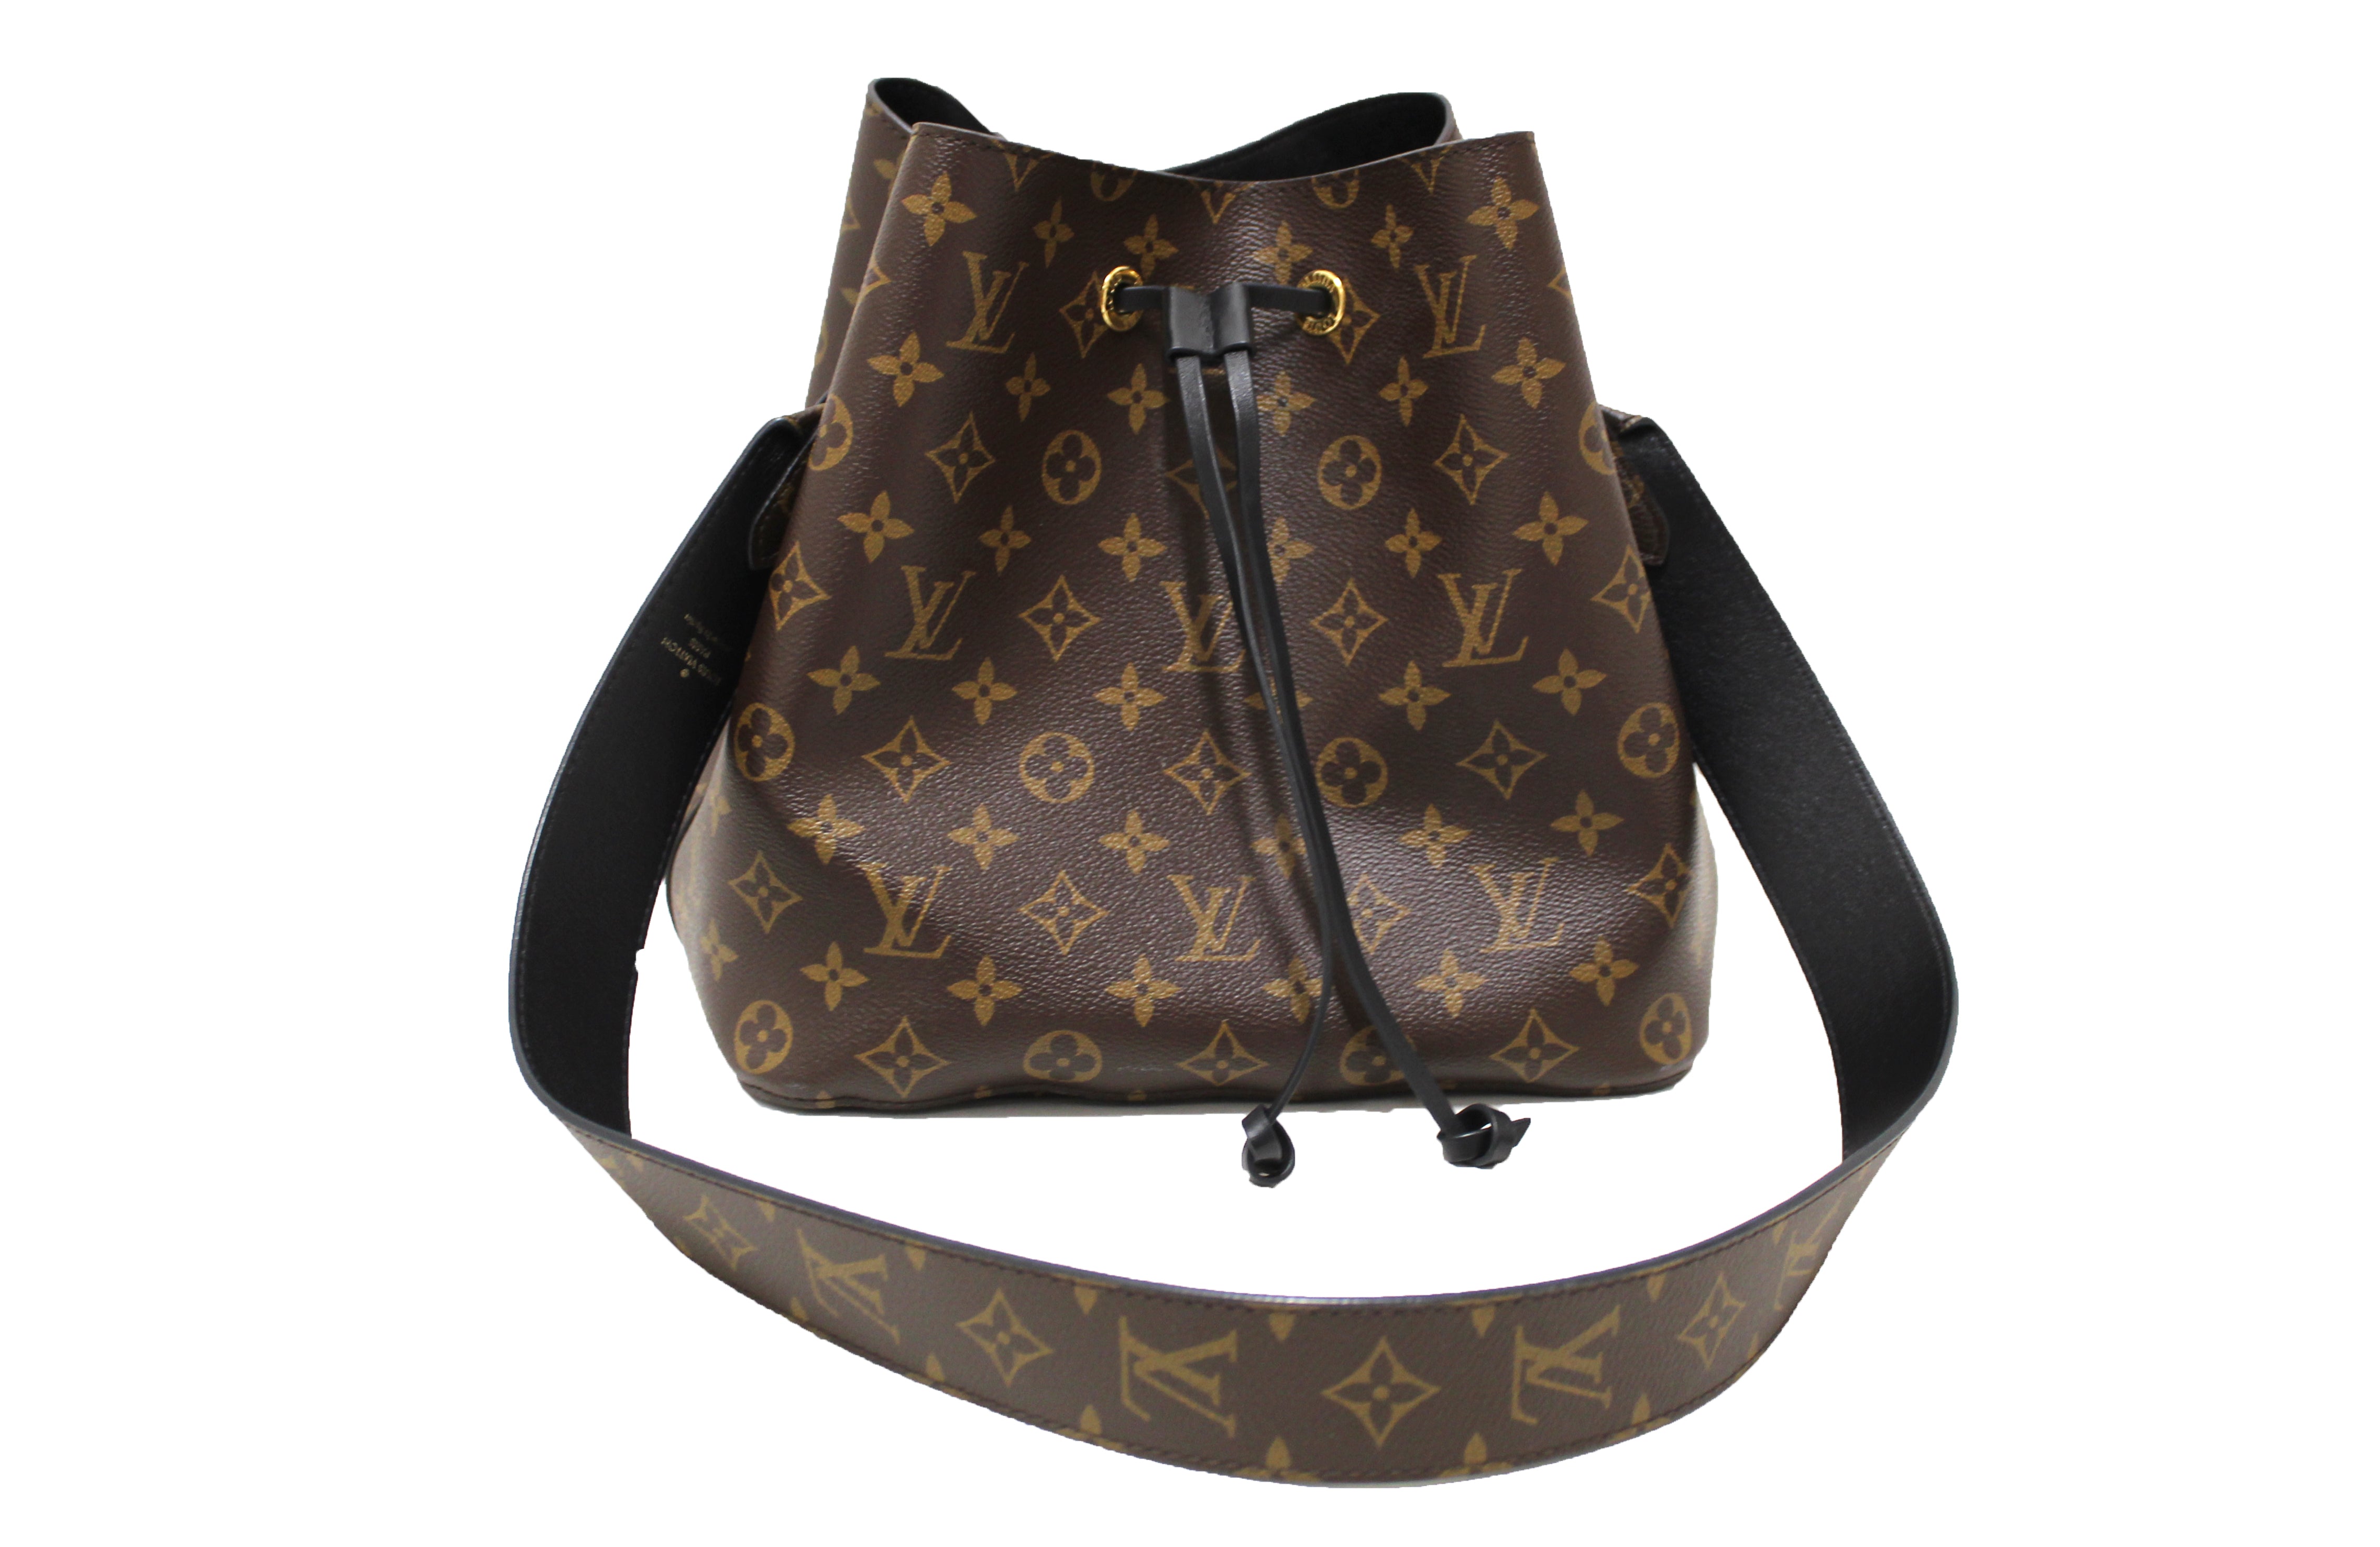 Classic LV on Sale